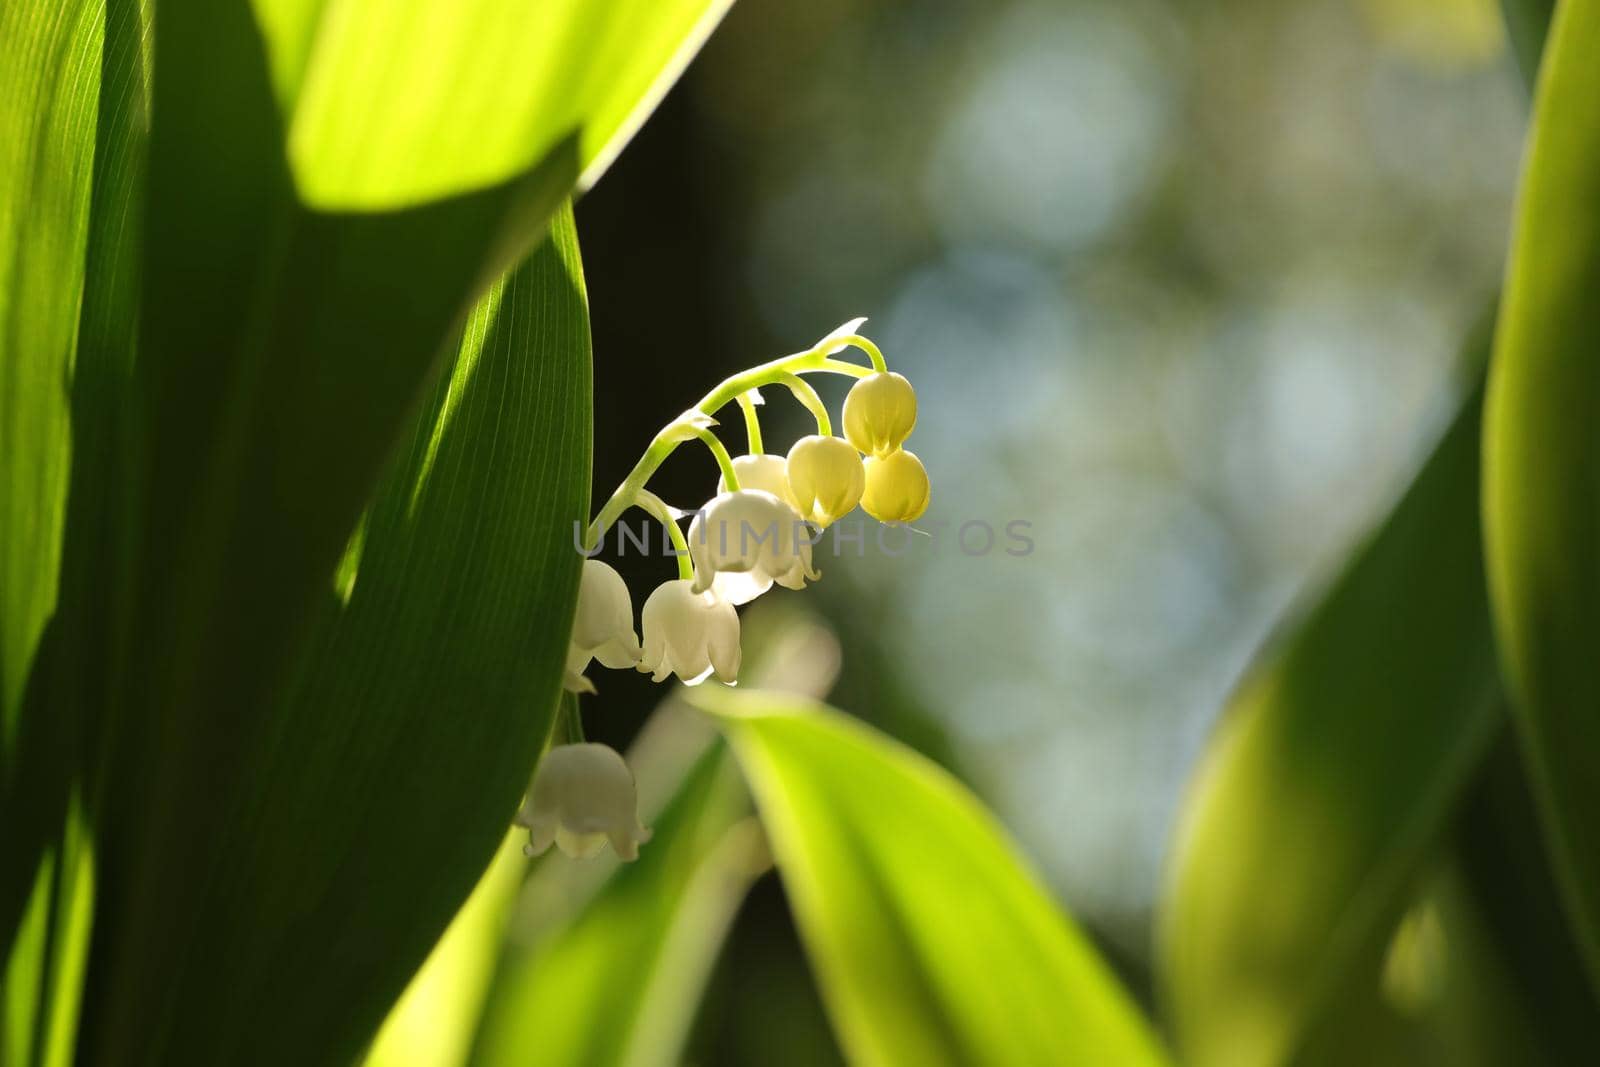 Lily of the valley by nature78